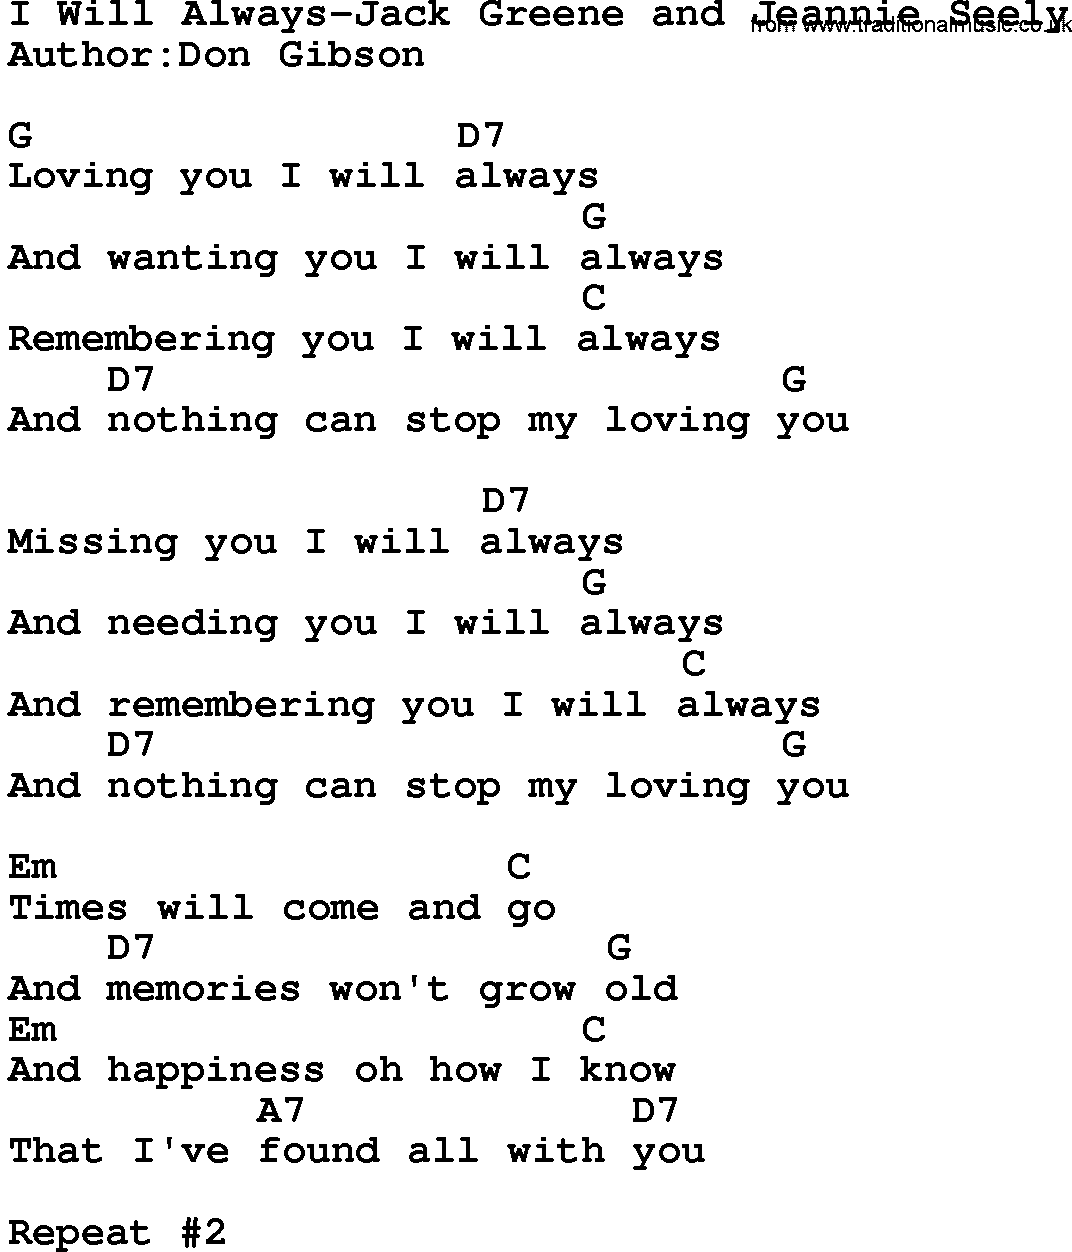 Country music song: I Will Always-Jack Greene And Jeannie Seely lyrics and chords